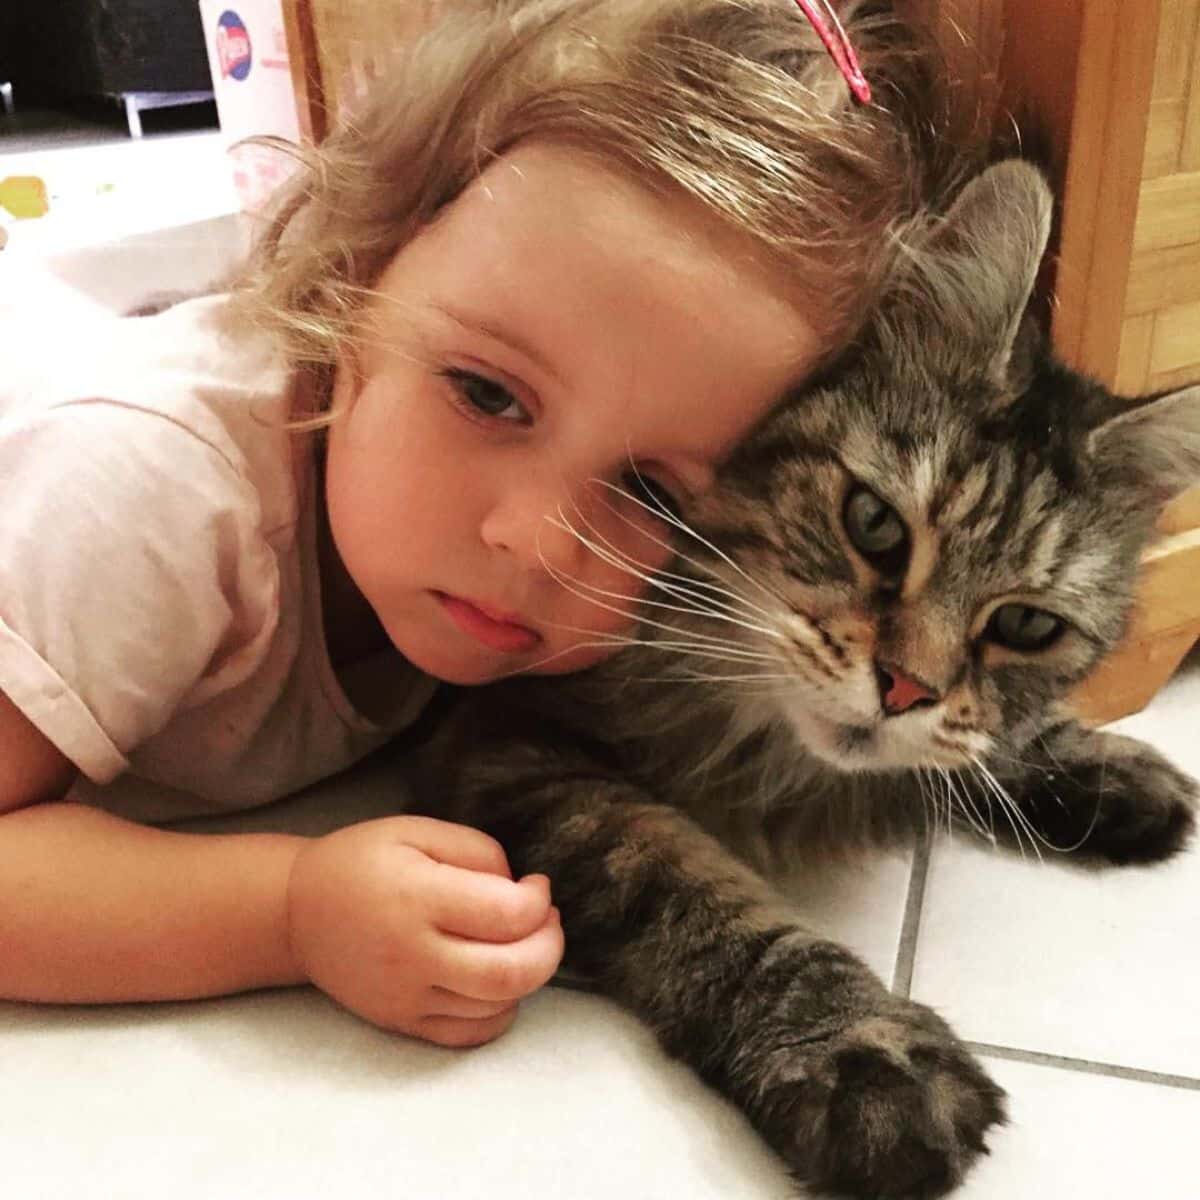 A young girl cuddling with a tabby maine coon on a floor.